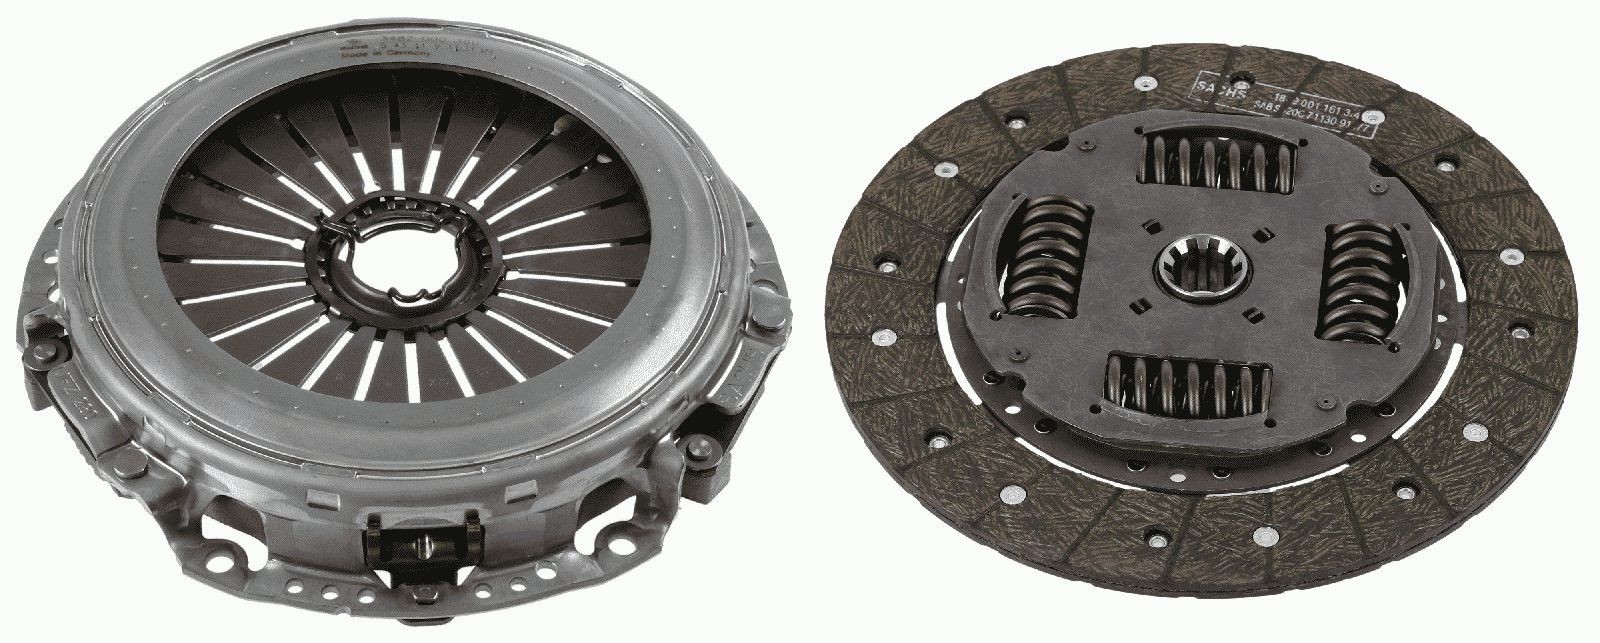 Original SACHS Clutch and flywheel kit 3400 700 551 for RENAULT MASTER